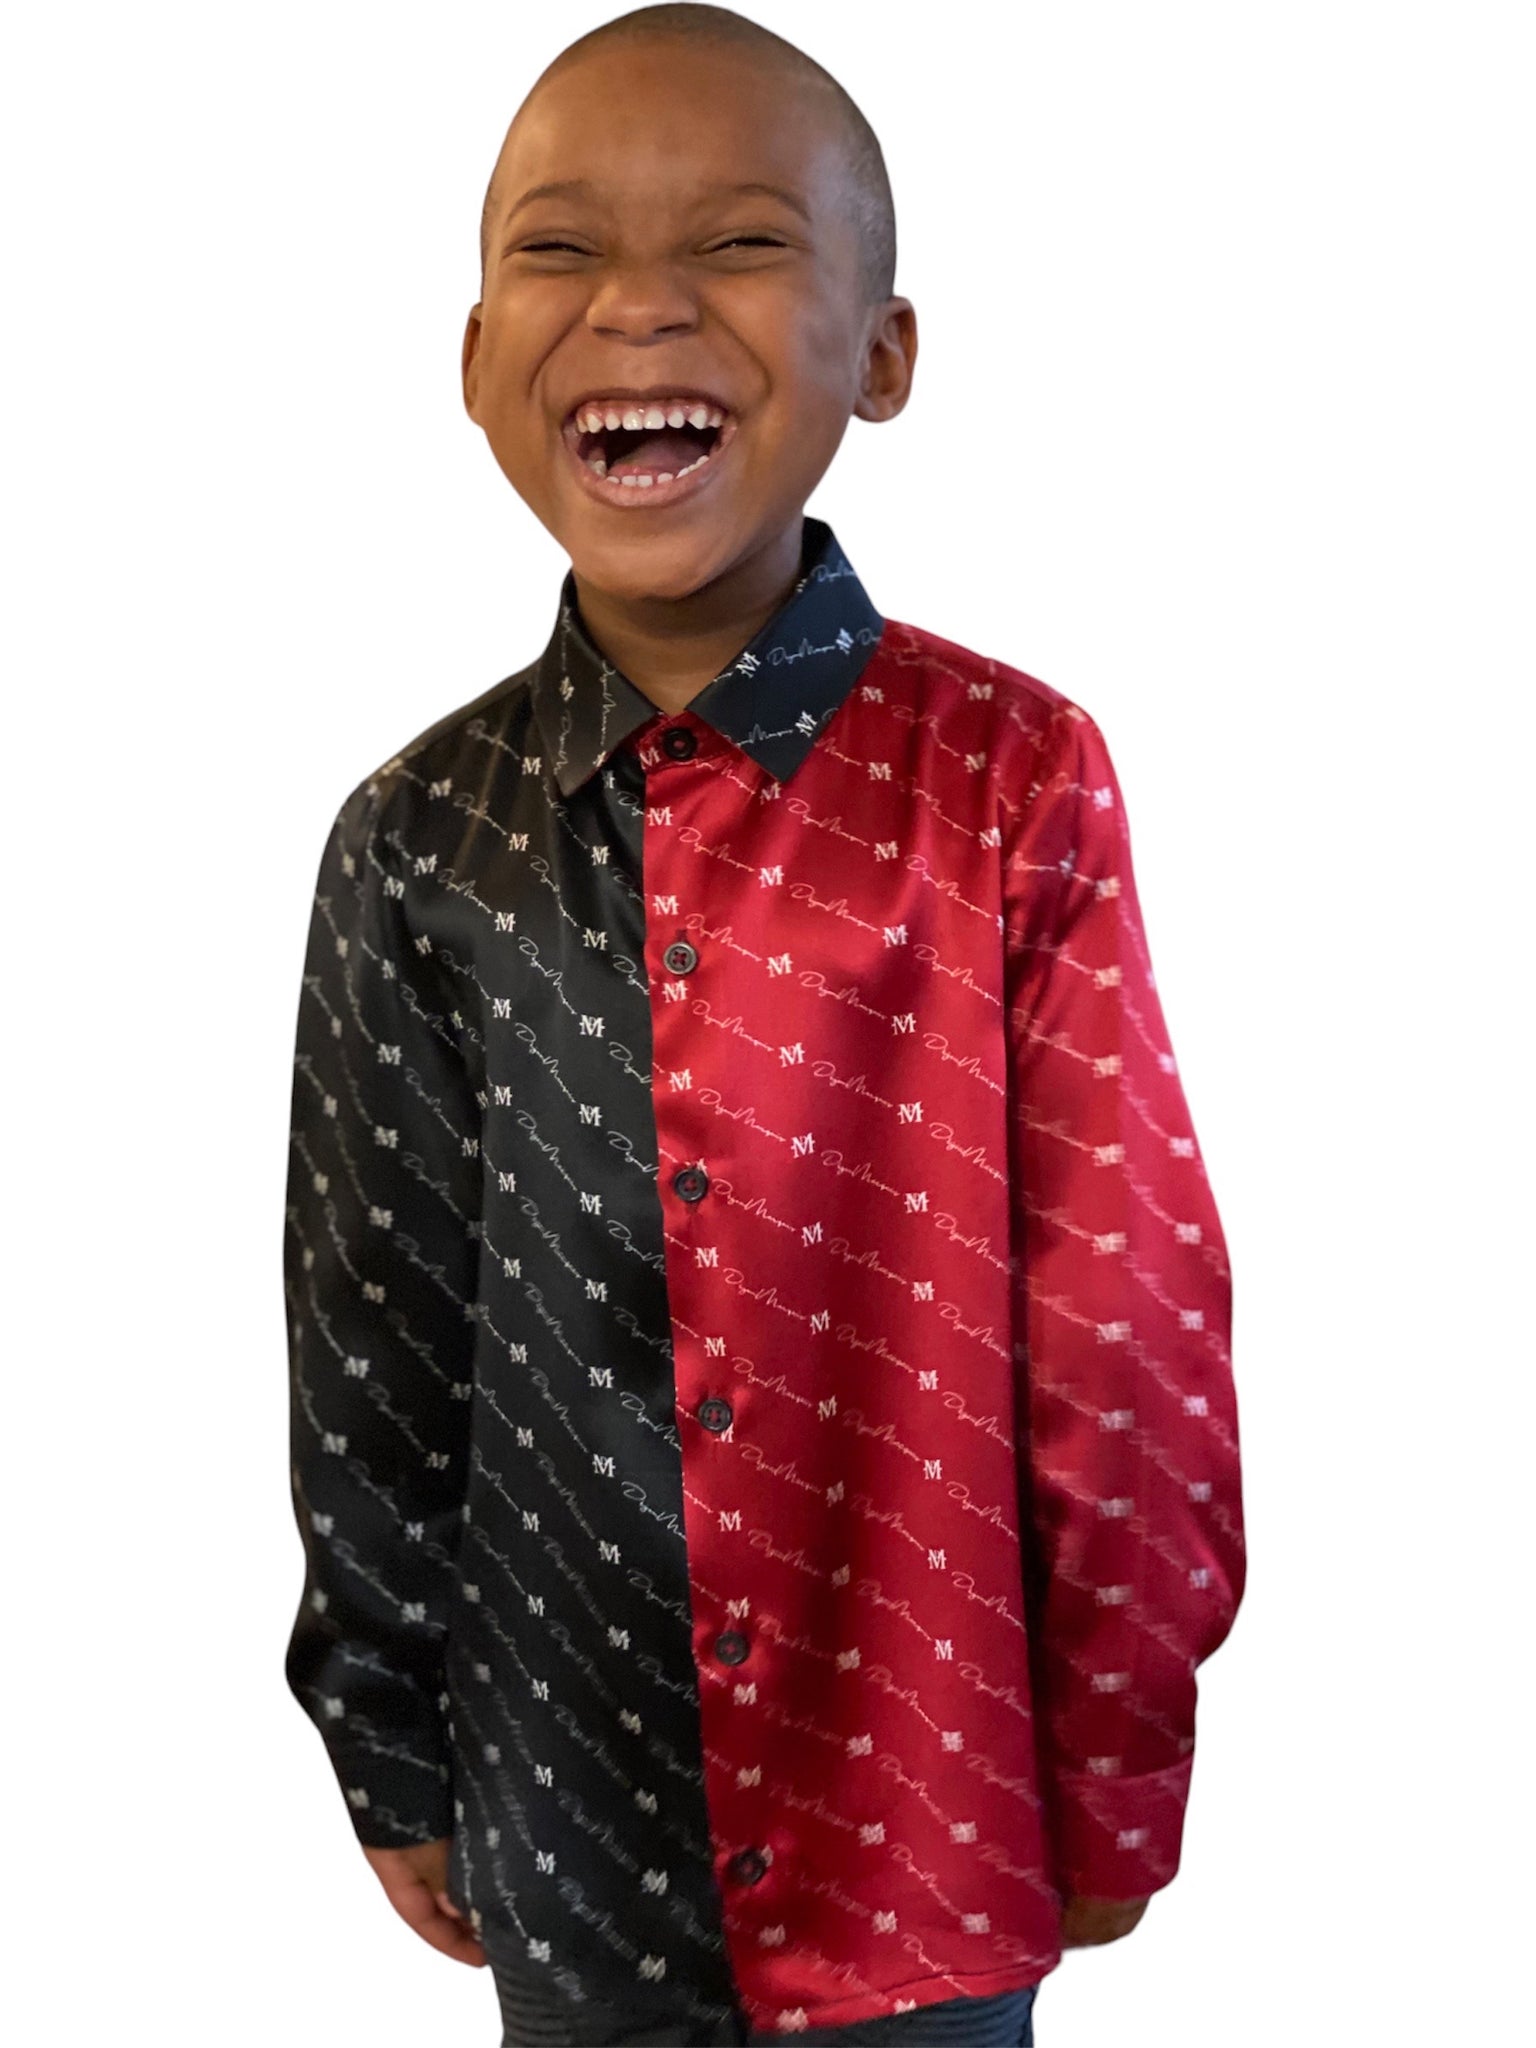 DM BLACK AND RED SIGNATURE SILK SHIRT FOR KIDS/ INFANTS